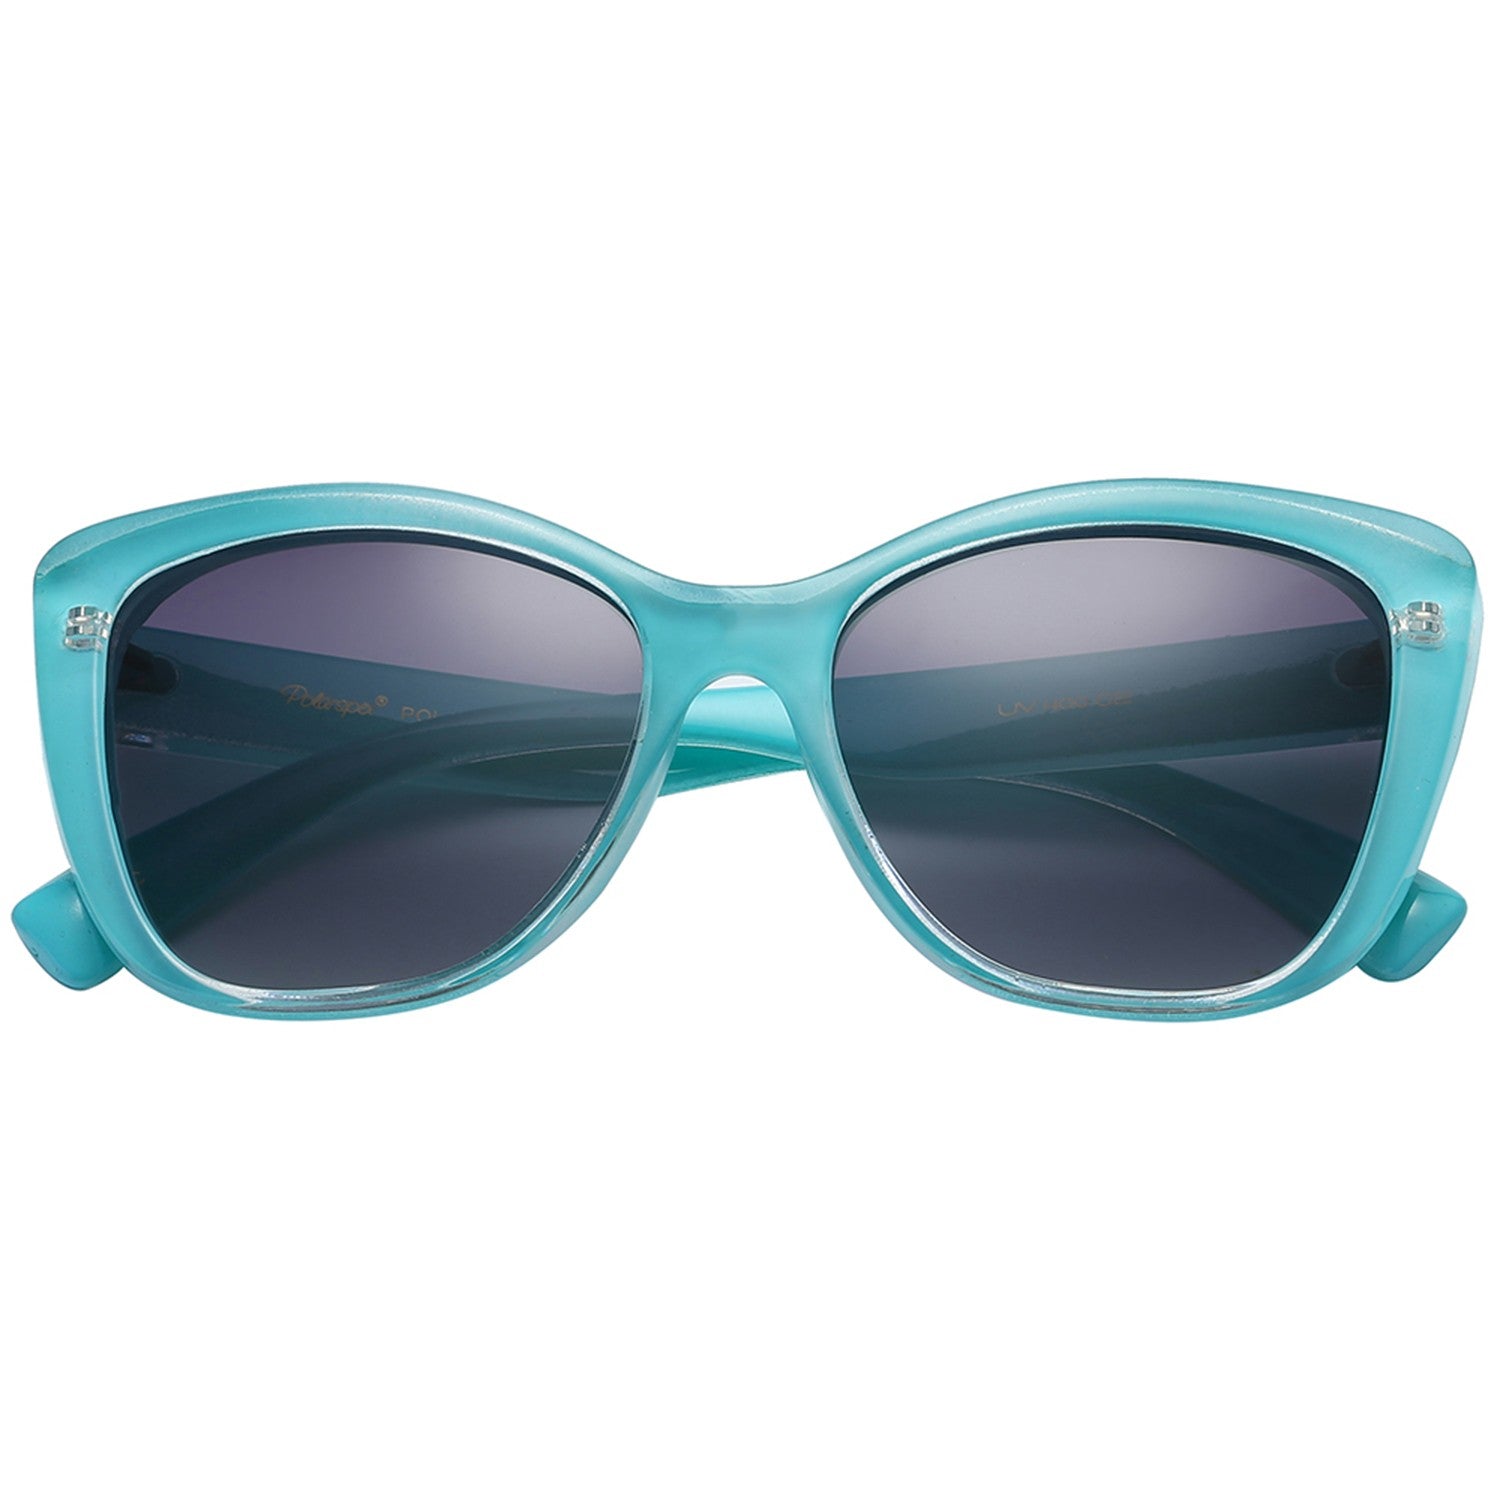 Polarspex Polarized Jackie-O Cat Eyes Style Sunglasses with Turquoise Teal Frames and Polarized Gradient Smoke Lenses for Women